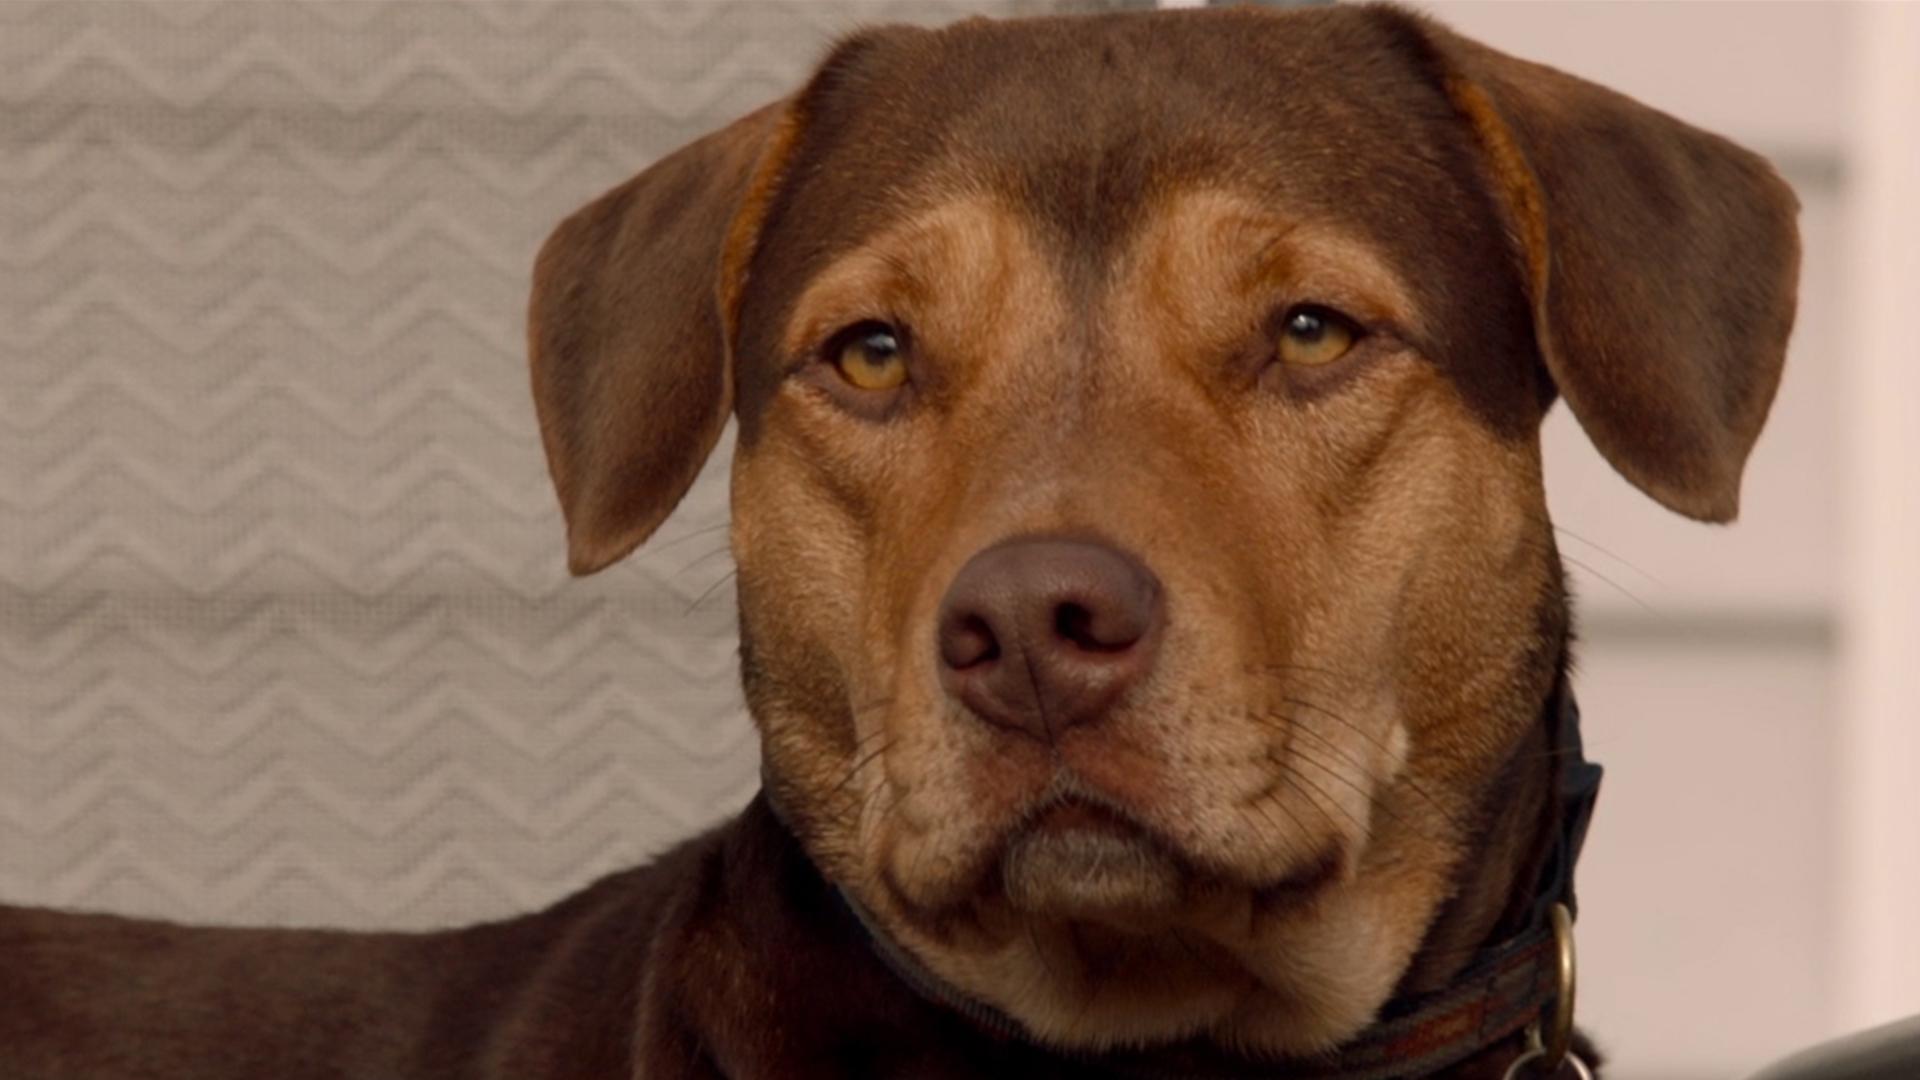 WATCH 'A Dog's Way Home' Review: Pitbull Star Triumphs Over Human